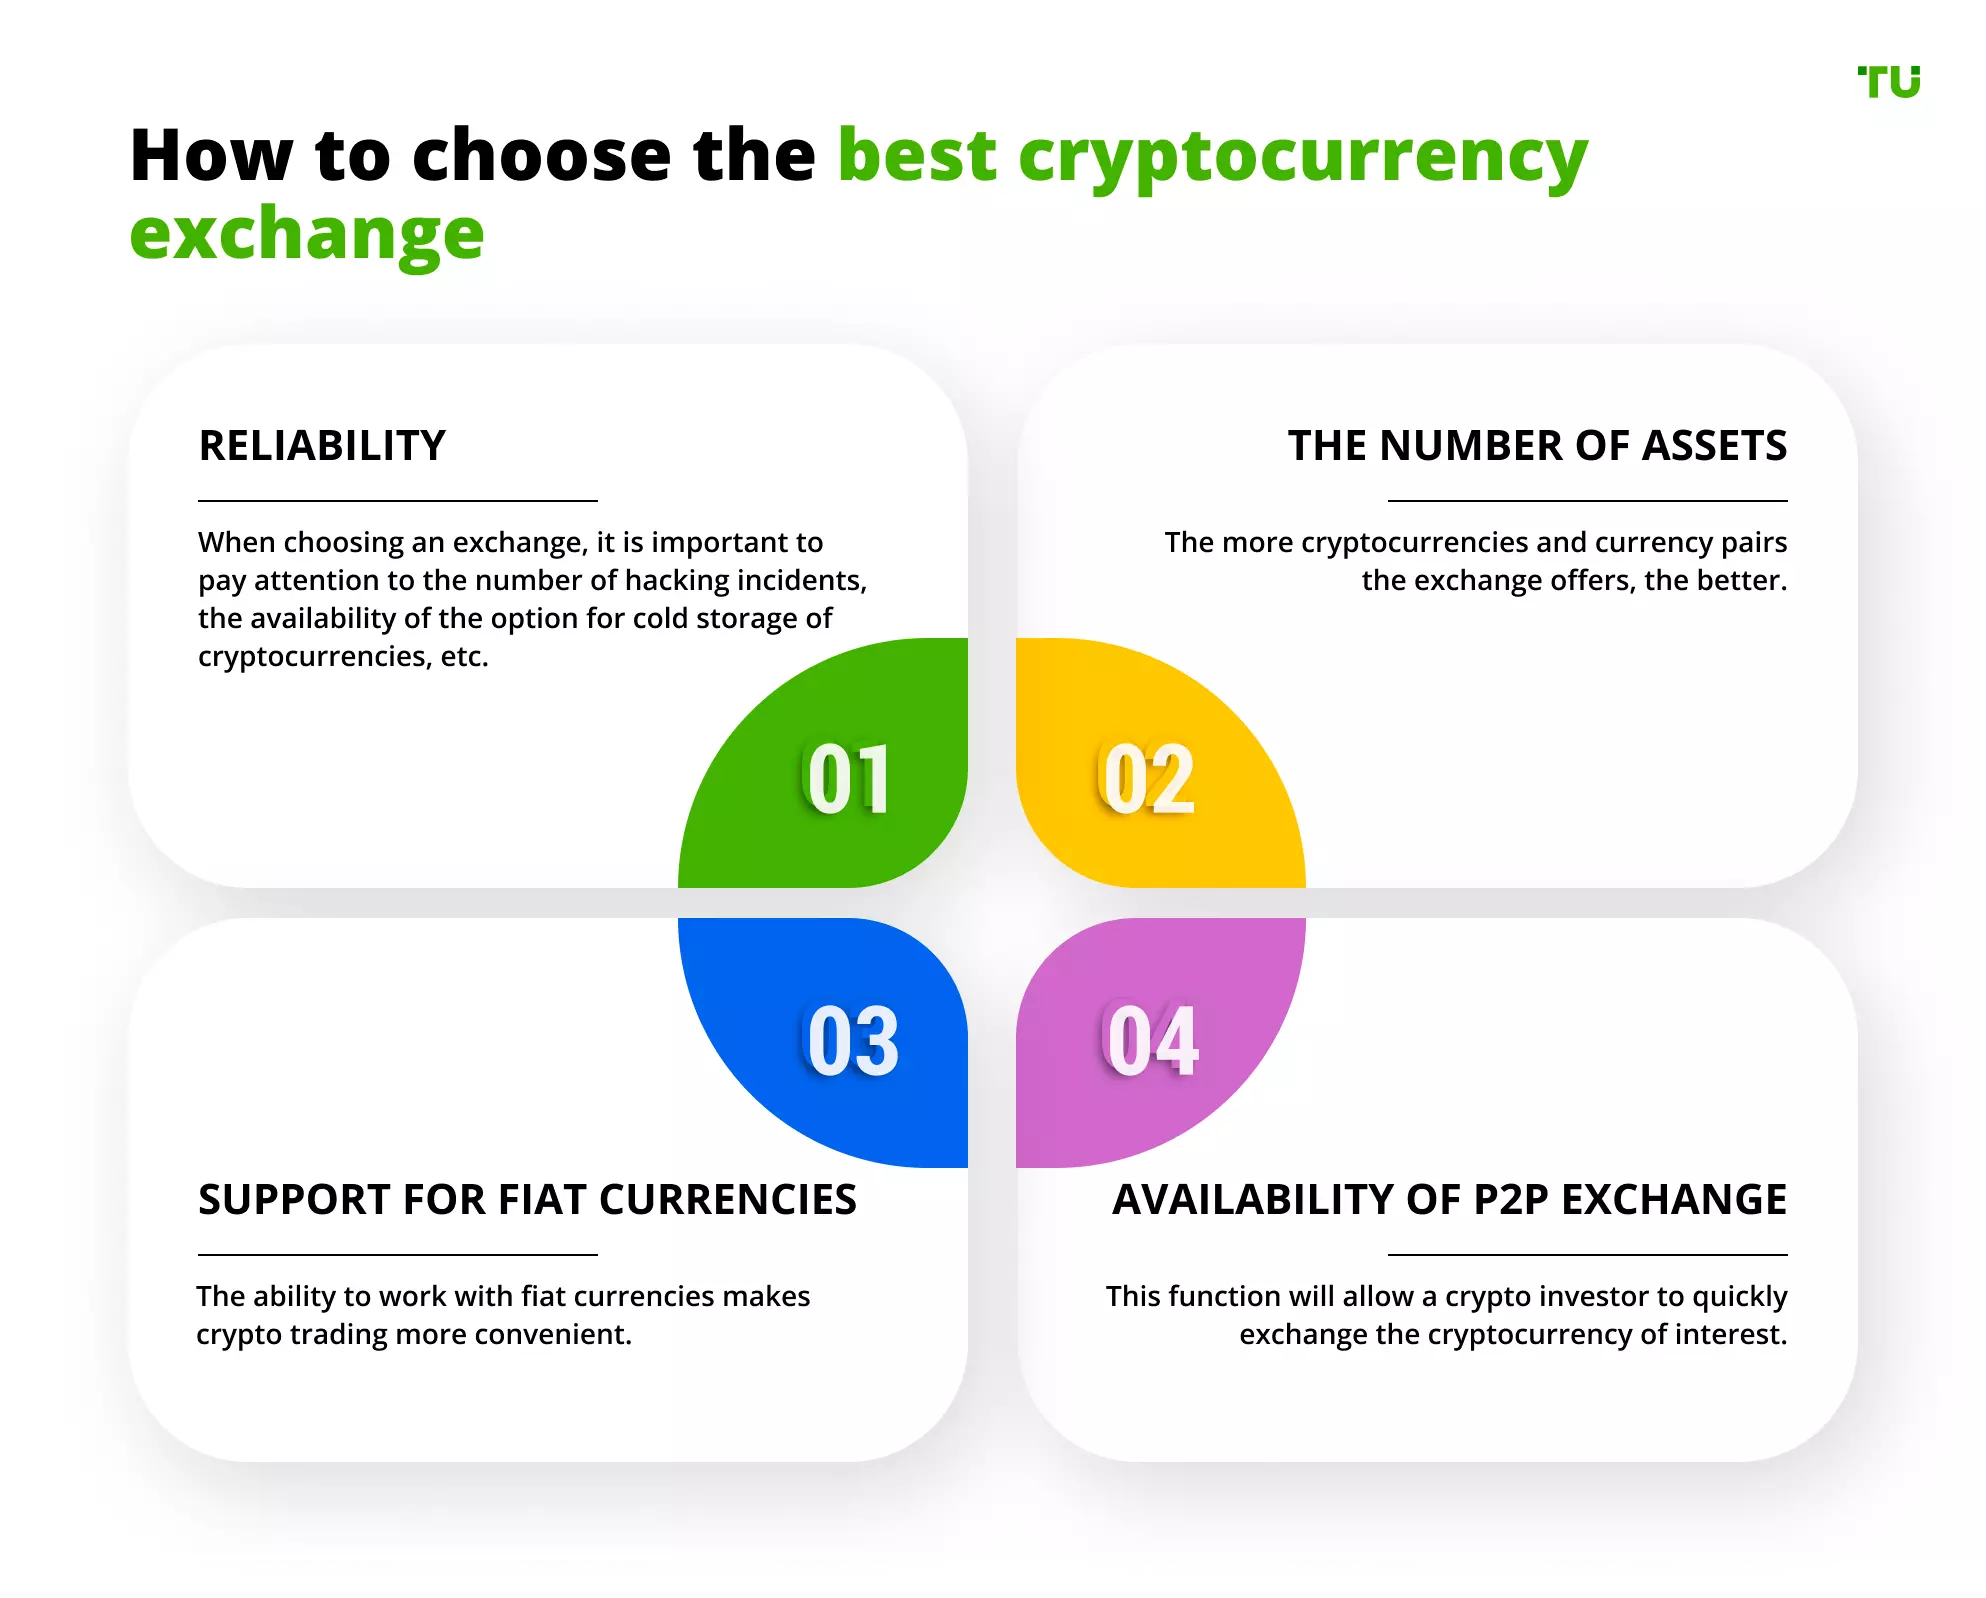 How to choose the best cryptocurrency exchange